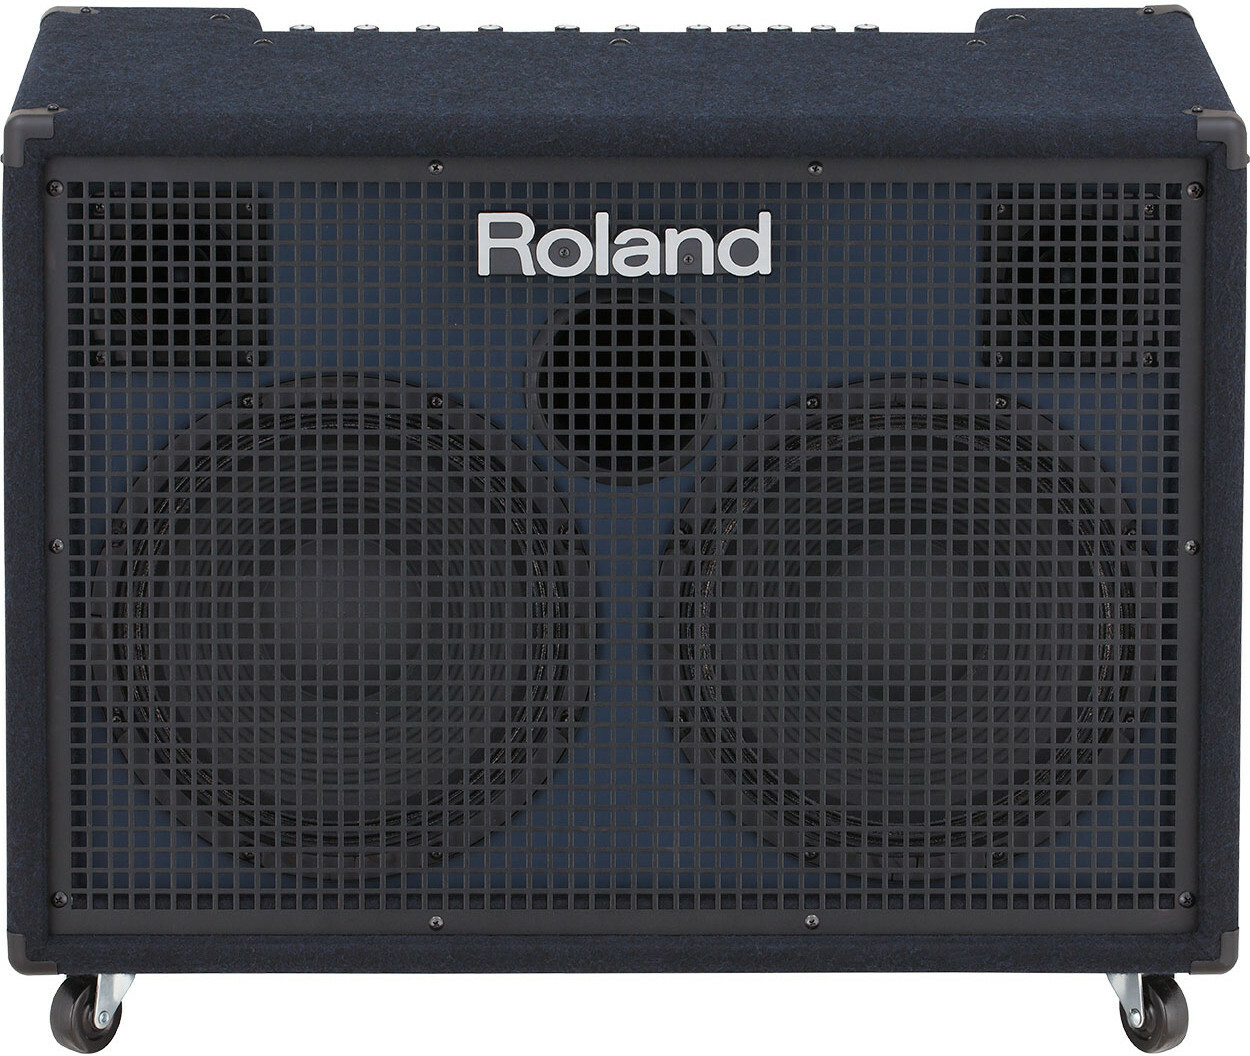 Roland Kc 990 160w + 160w Stereo 4 Ch Keyboard Amp Effect - Ampli Clavier - Main picture